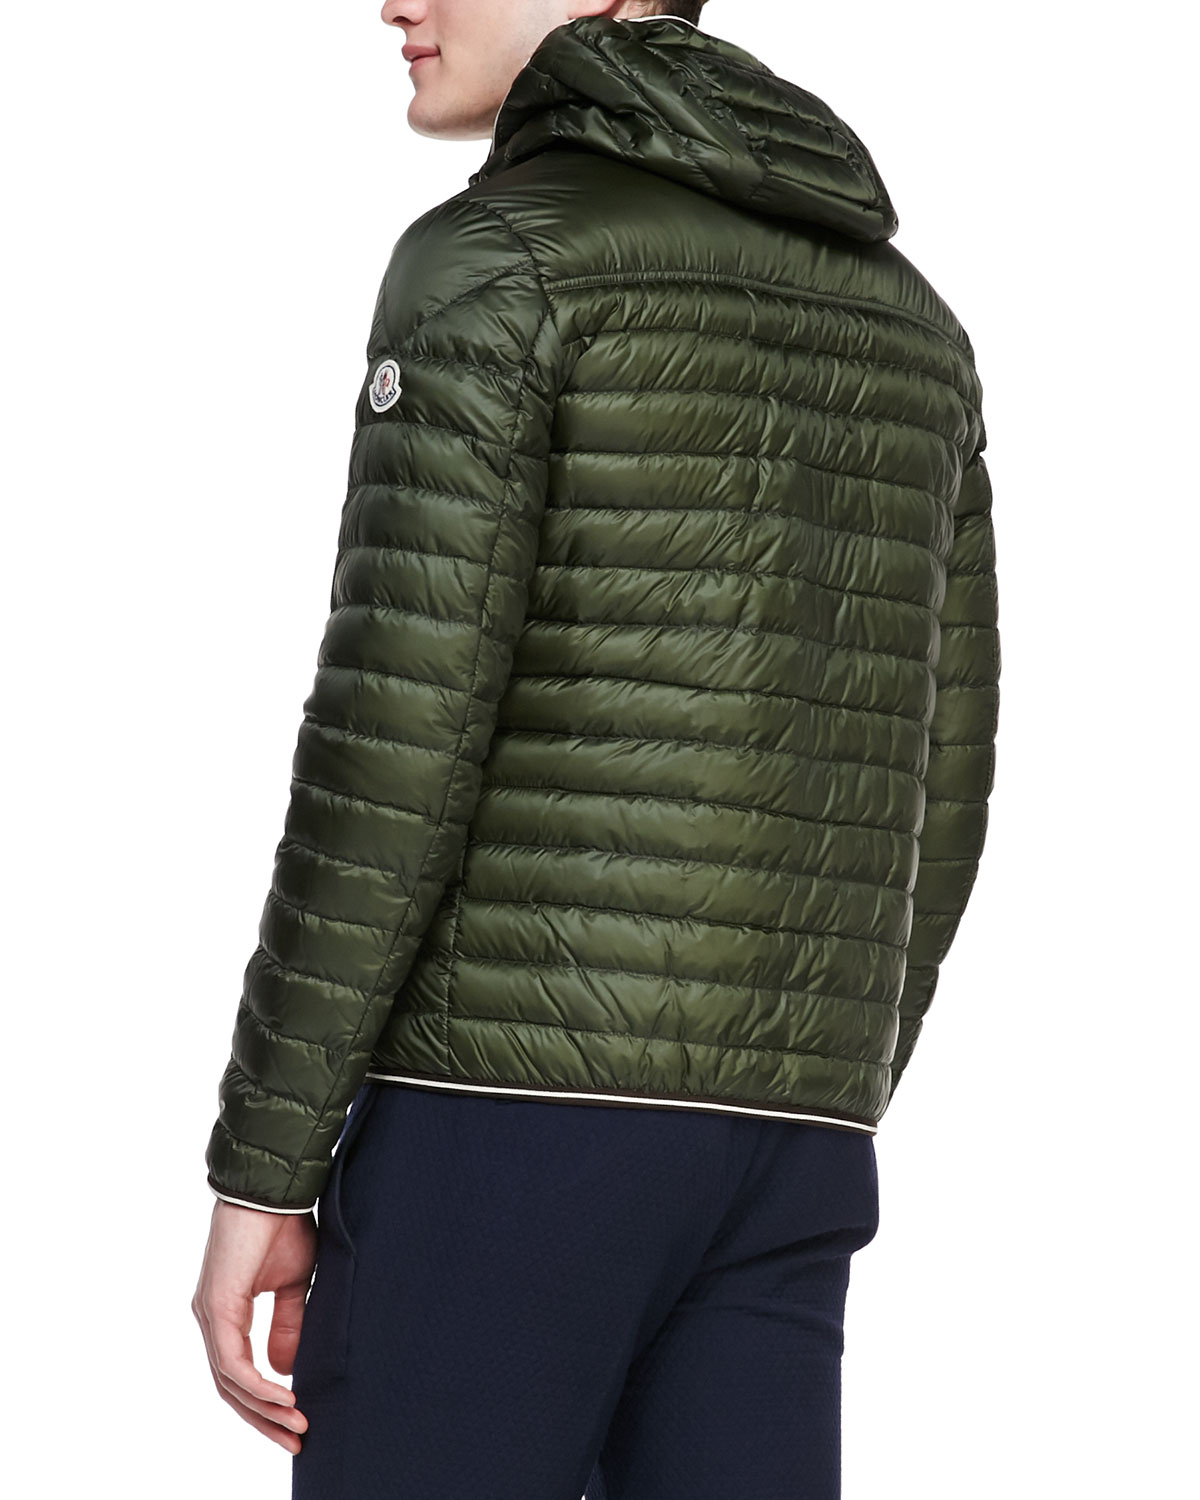 Lyst - Moncler Light Weight Hooded Puffer Jacket Olive in Green for Men